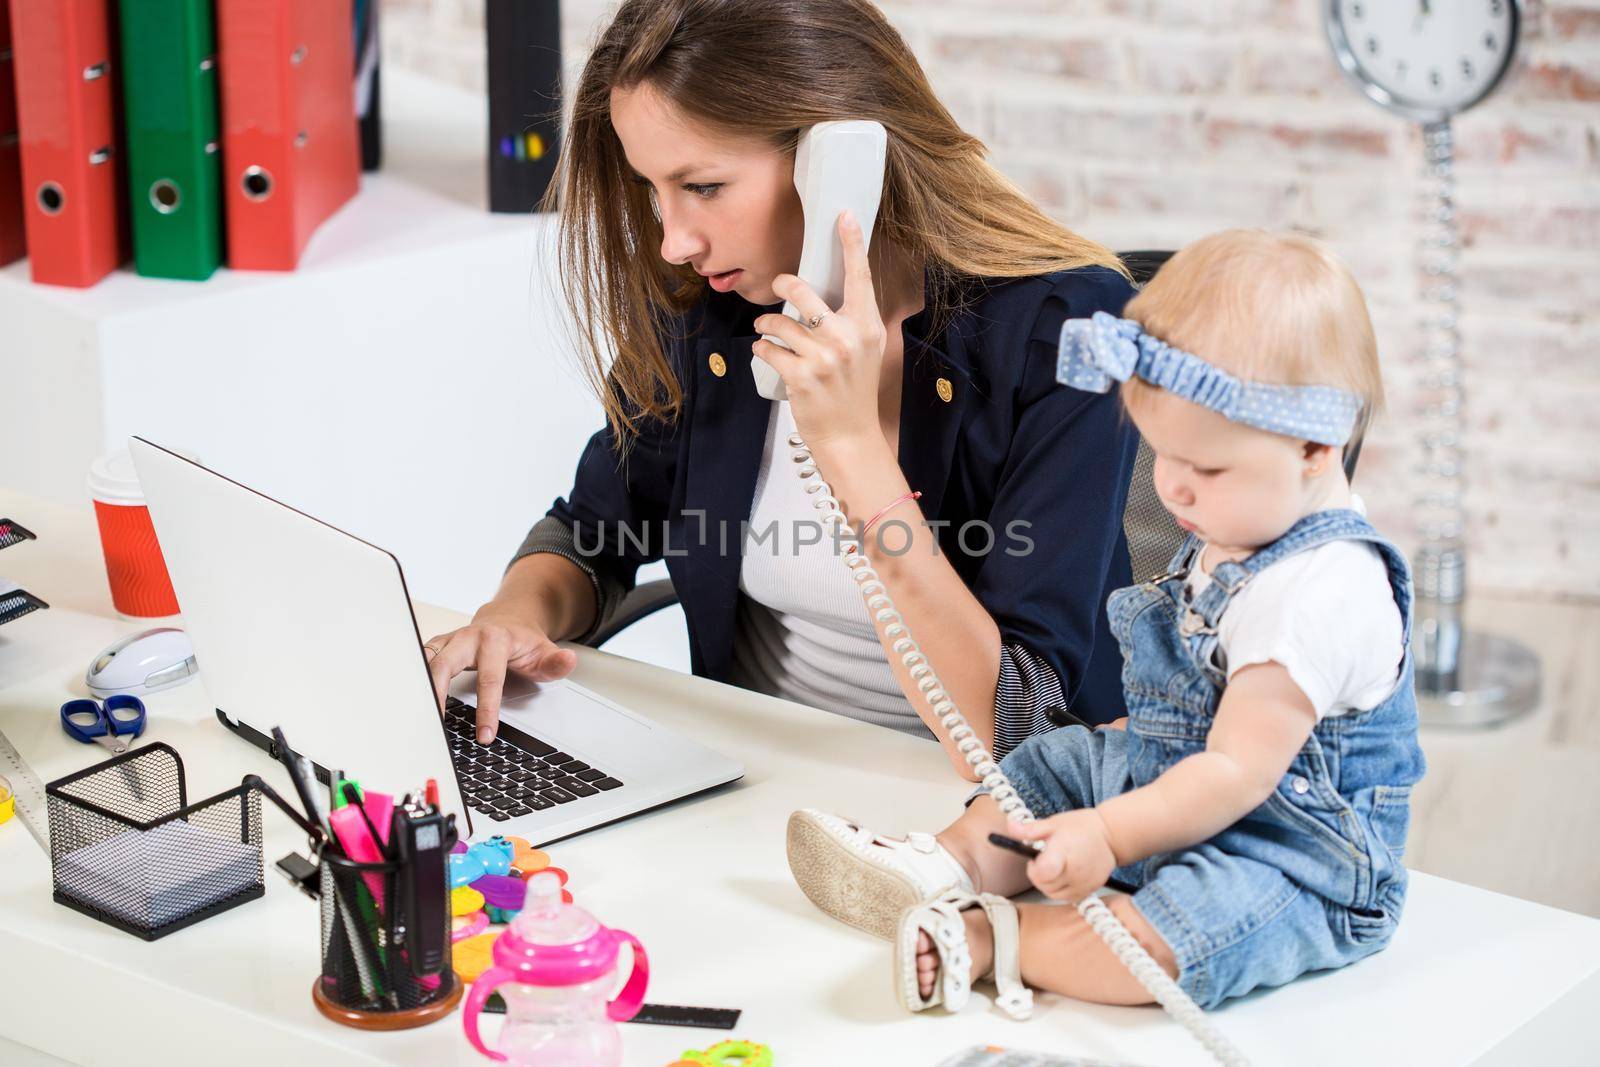 Businesswoman mother woman with a daughter working at the computer. At the workplace, together with a small child